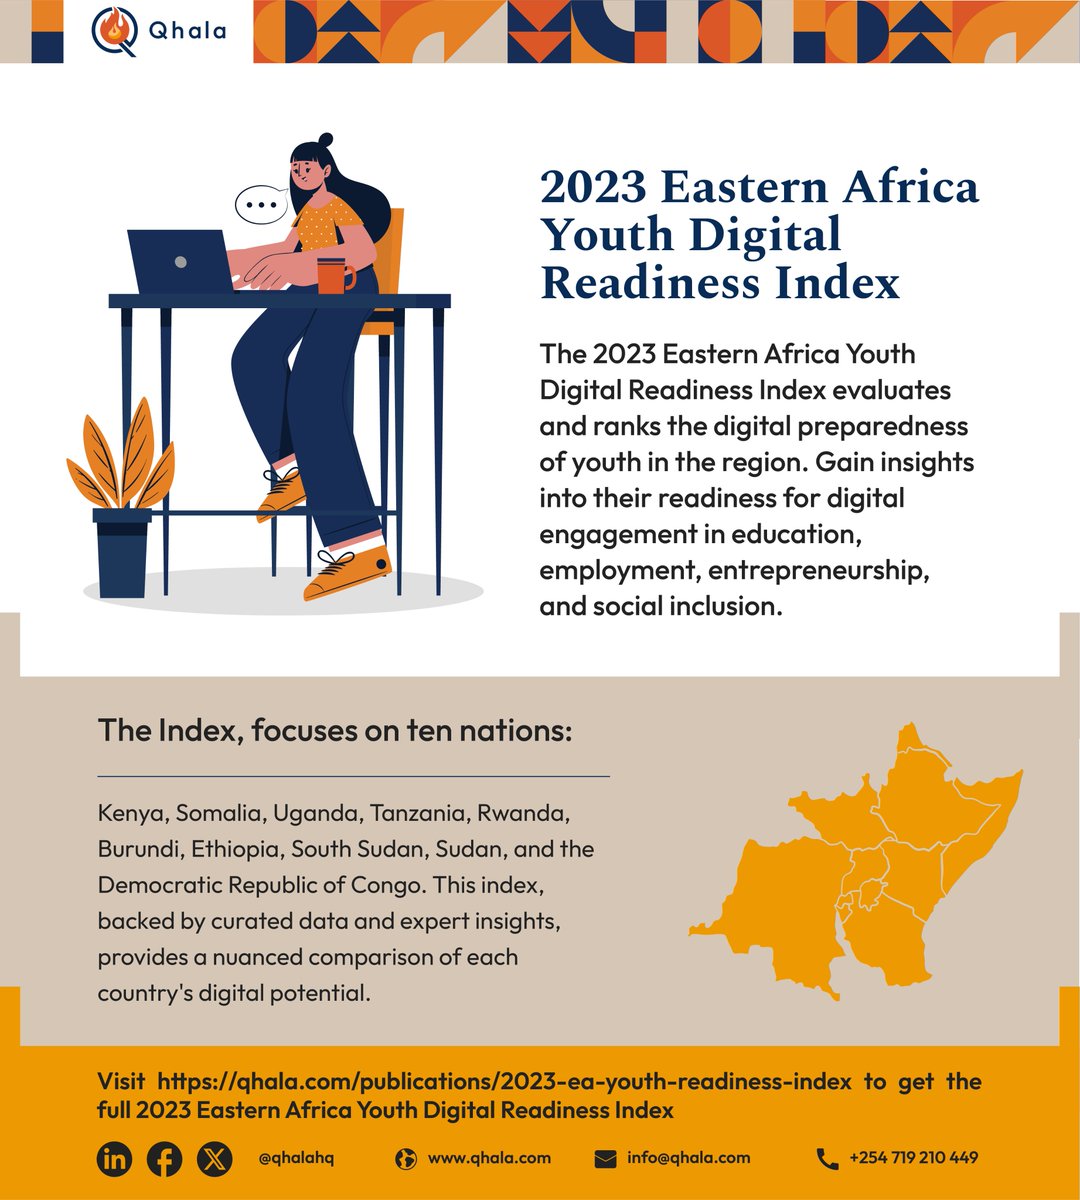 As we explore how prepared African youth are to navigate the digital economy, our recently launched 2023 E.A Youth Digital Readiness Index shines a light on some of the key areas we need to explore to ensure youths are digitally ready in Africa qhala.com/publications/2… #AskPSTanui